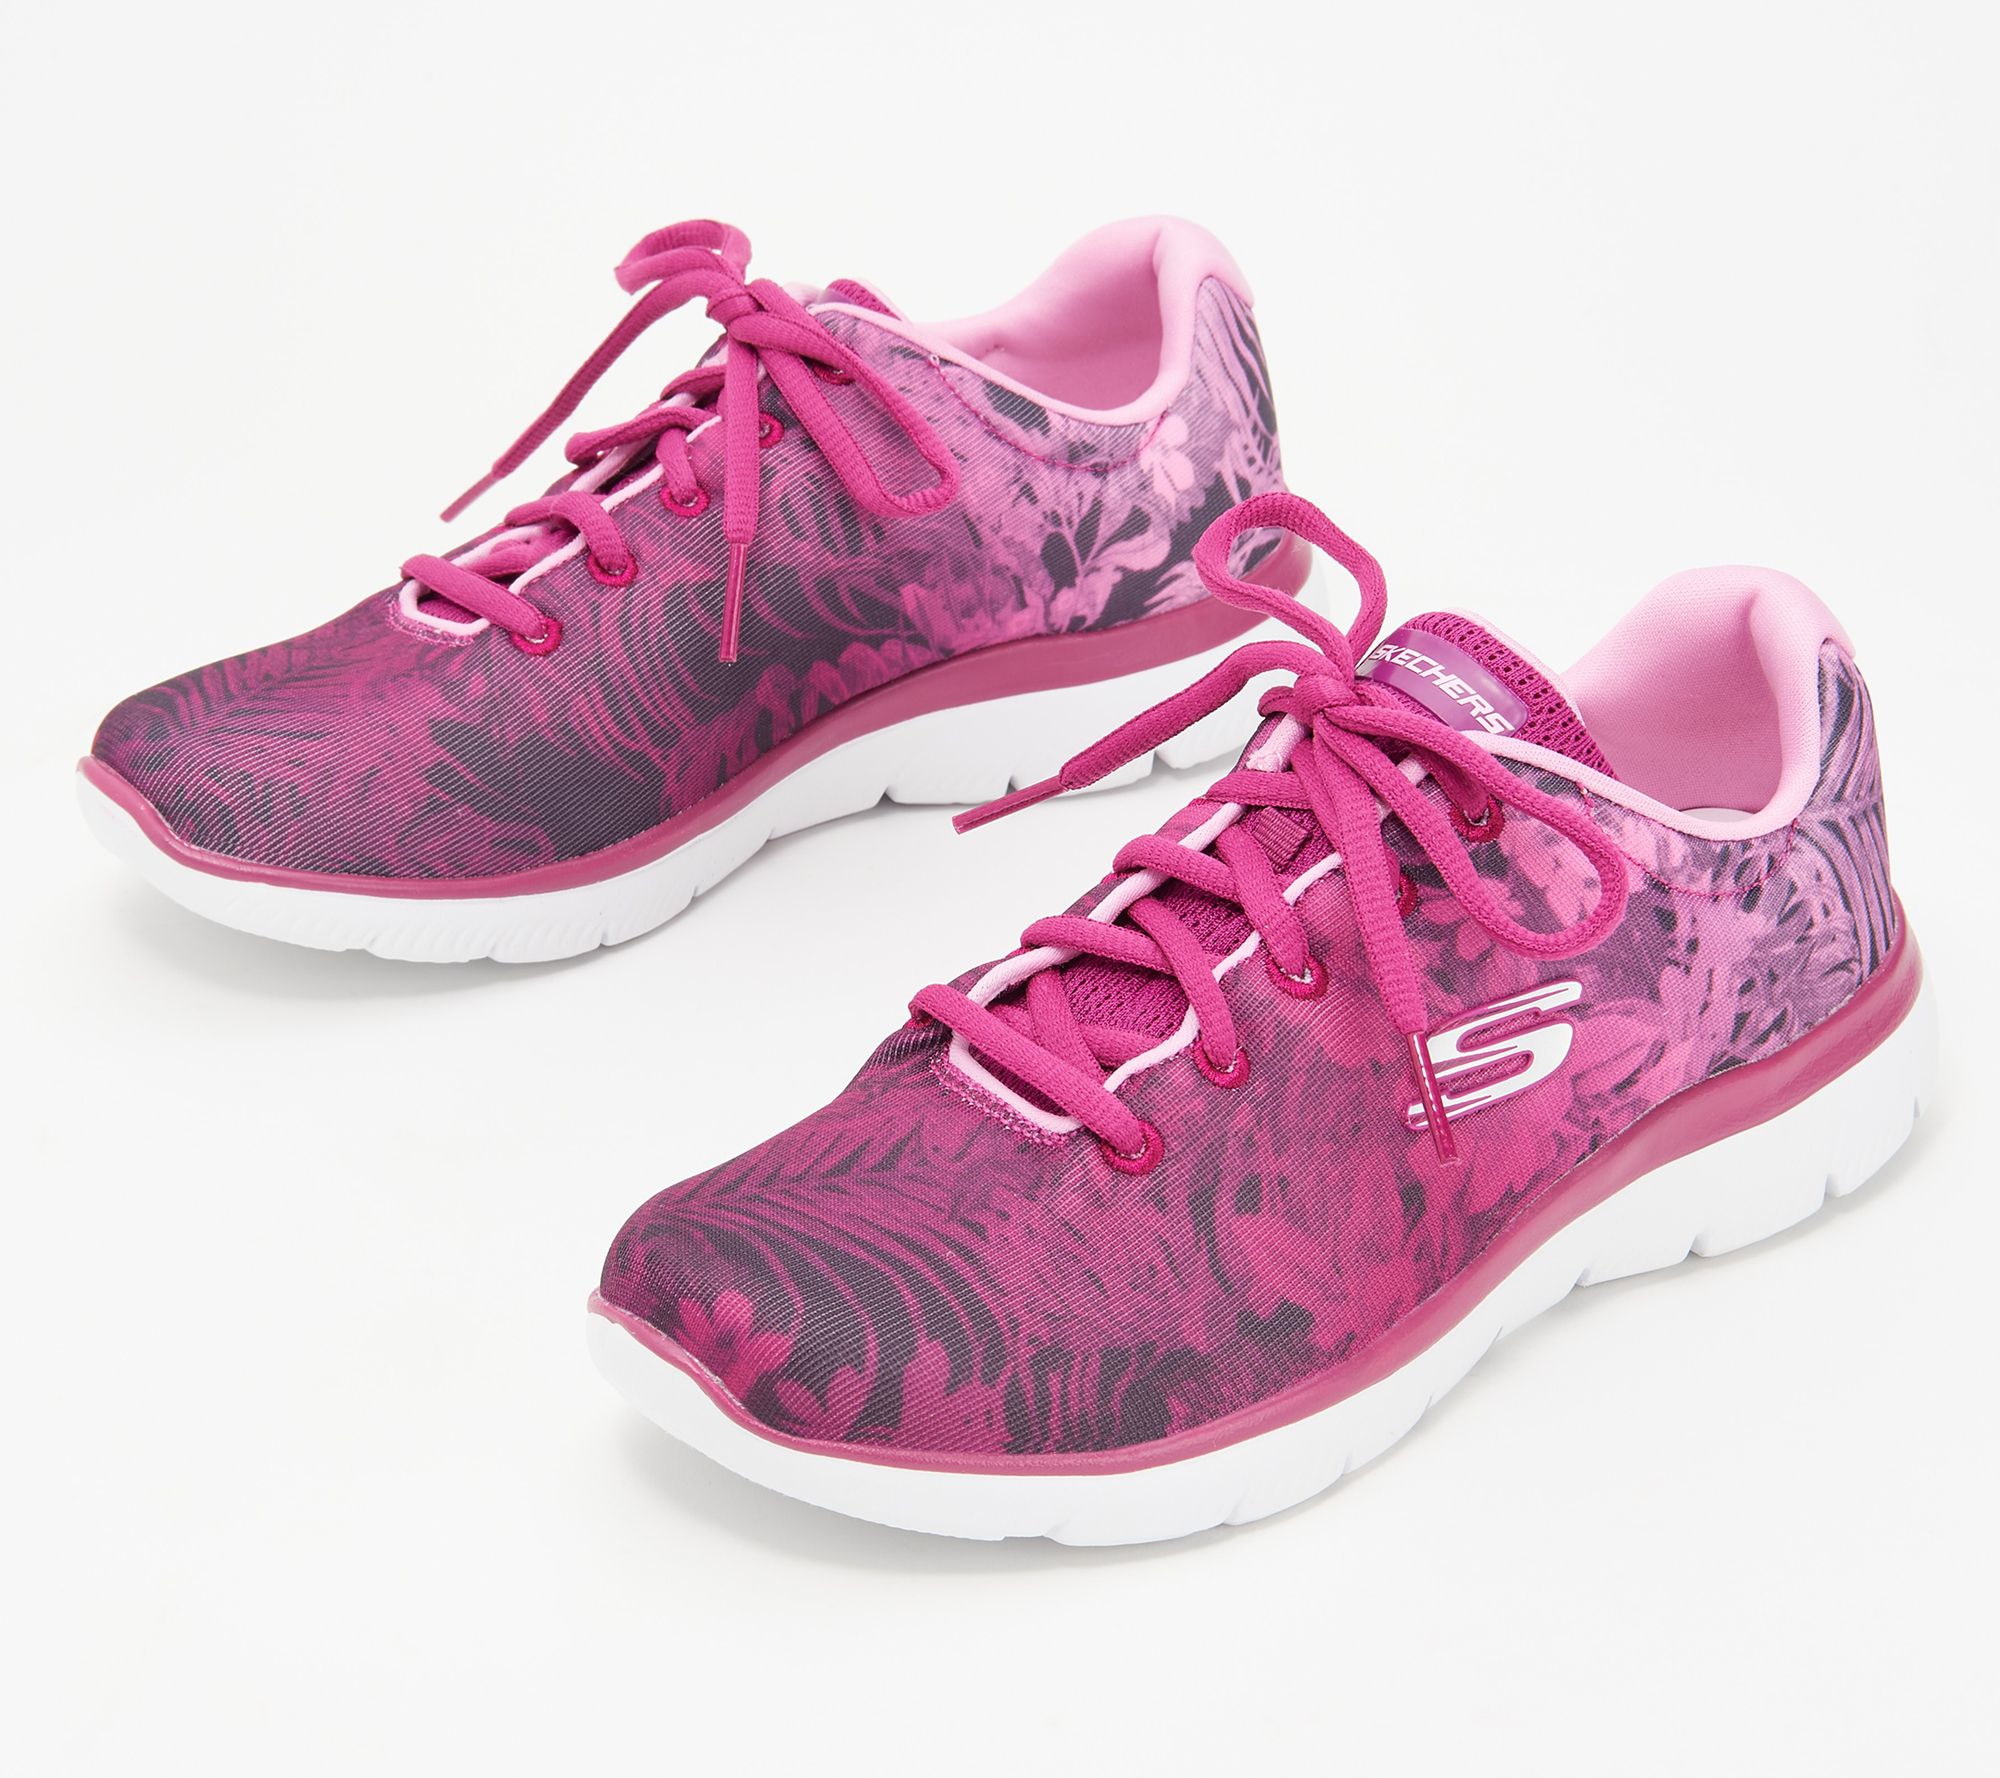 Summits Wander Washable Lace-Up - Sneaker Skechers Oasis